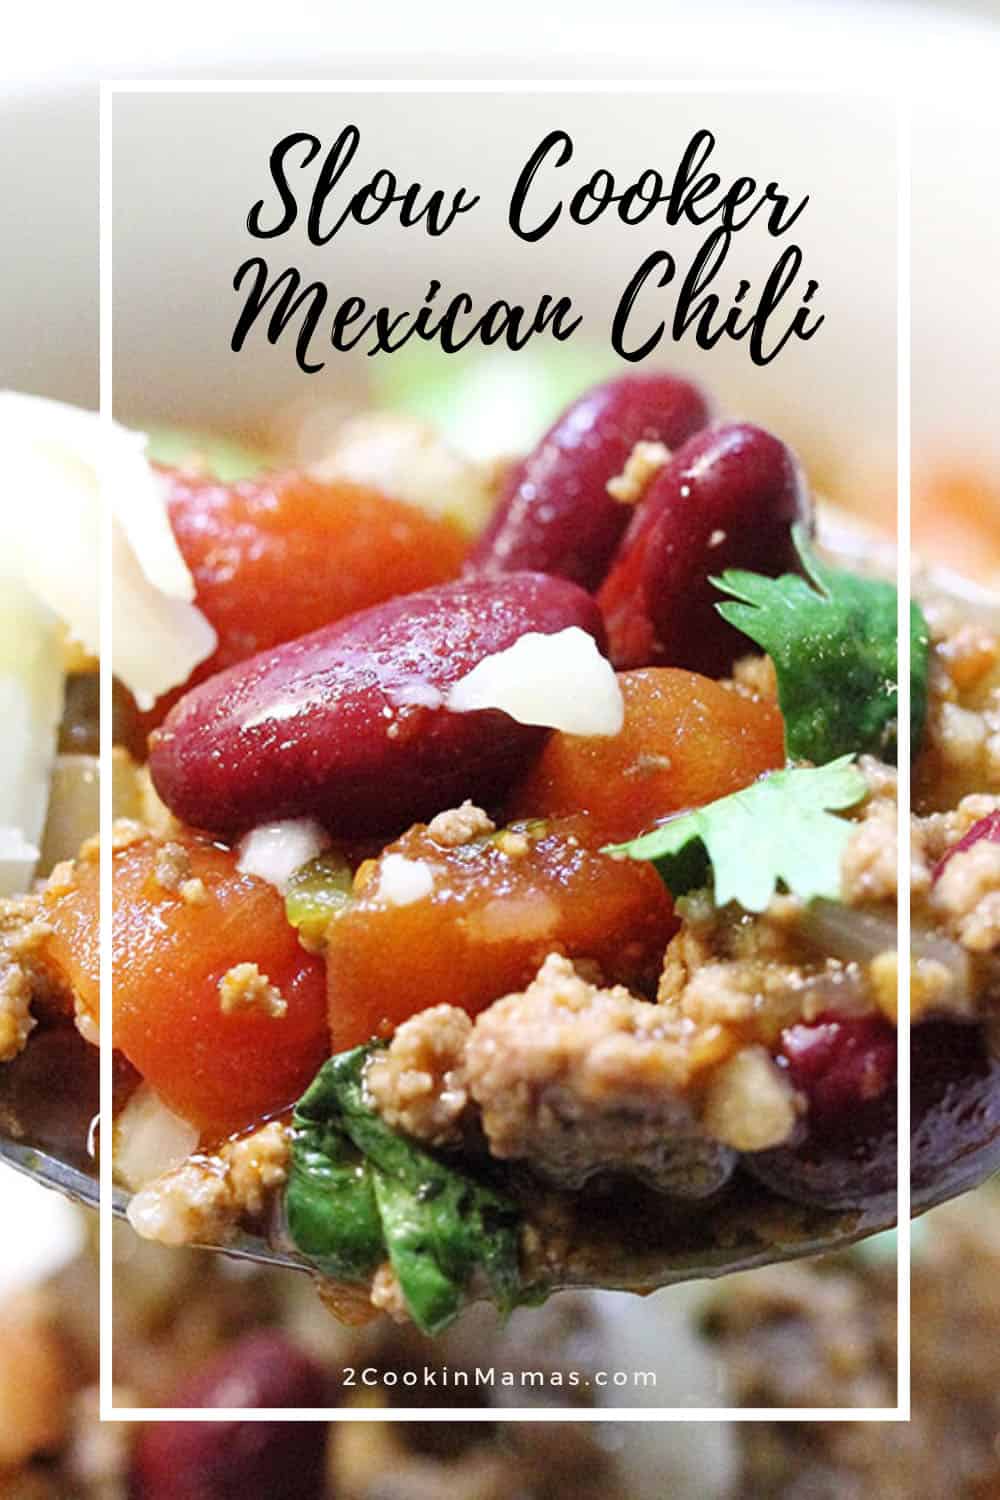 Easy Slow Cooker Mexican Chili